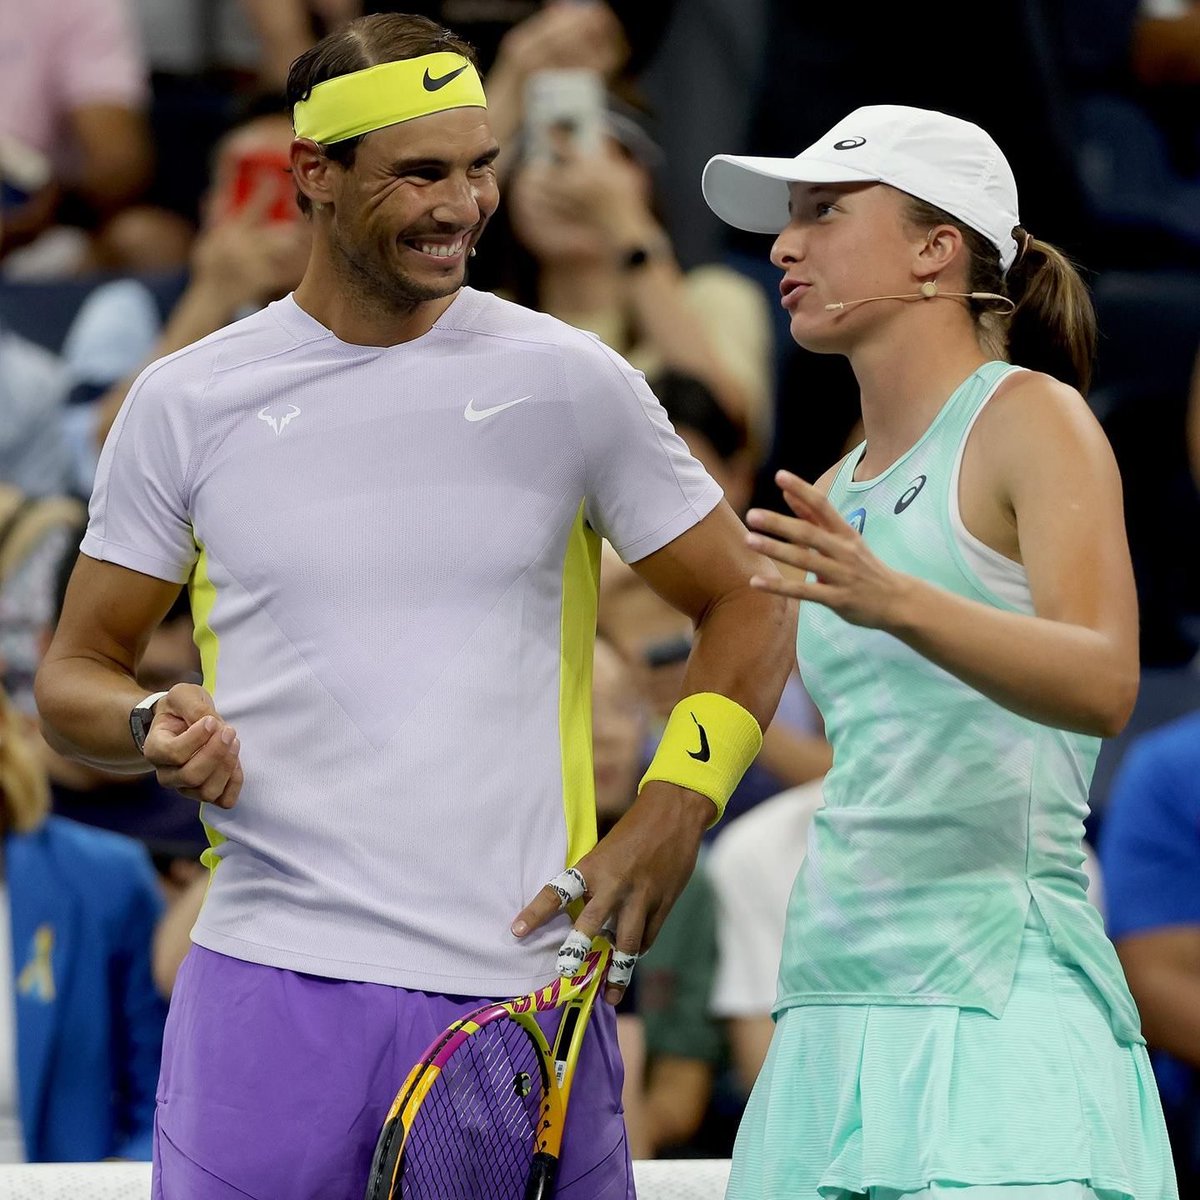 The two best young players in the world: Carlos Alcaraz and Iga Swiatek.

Alcaraz' idol: Rafael Nadal.

Swiatek's idol: Rafael Rafael.

It's not a coincidence, it's INFLUENCE.

Influence for being the greatest in history.